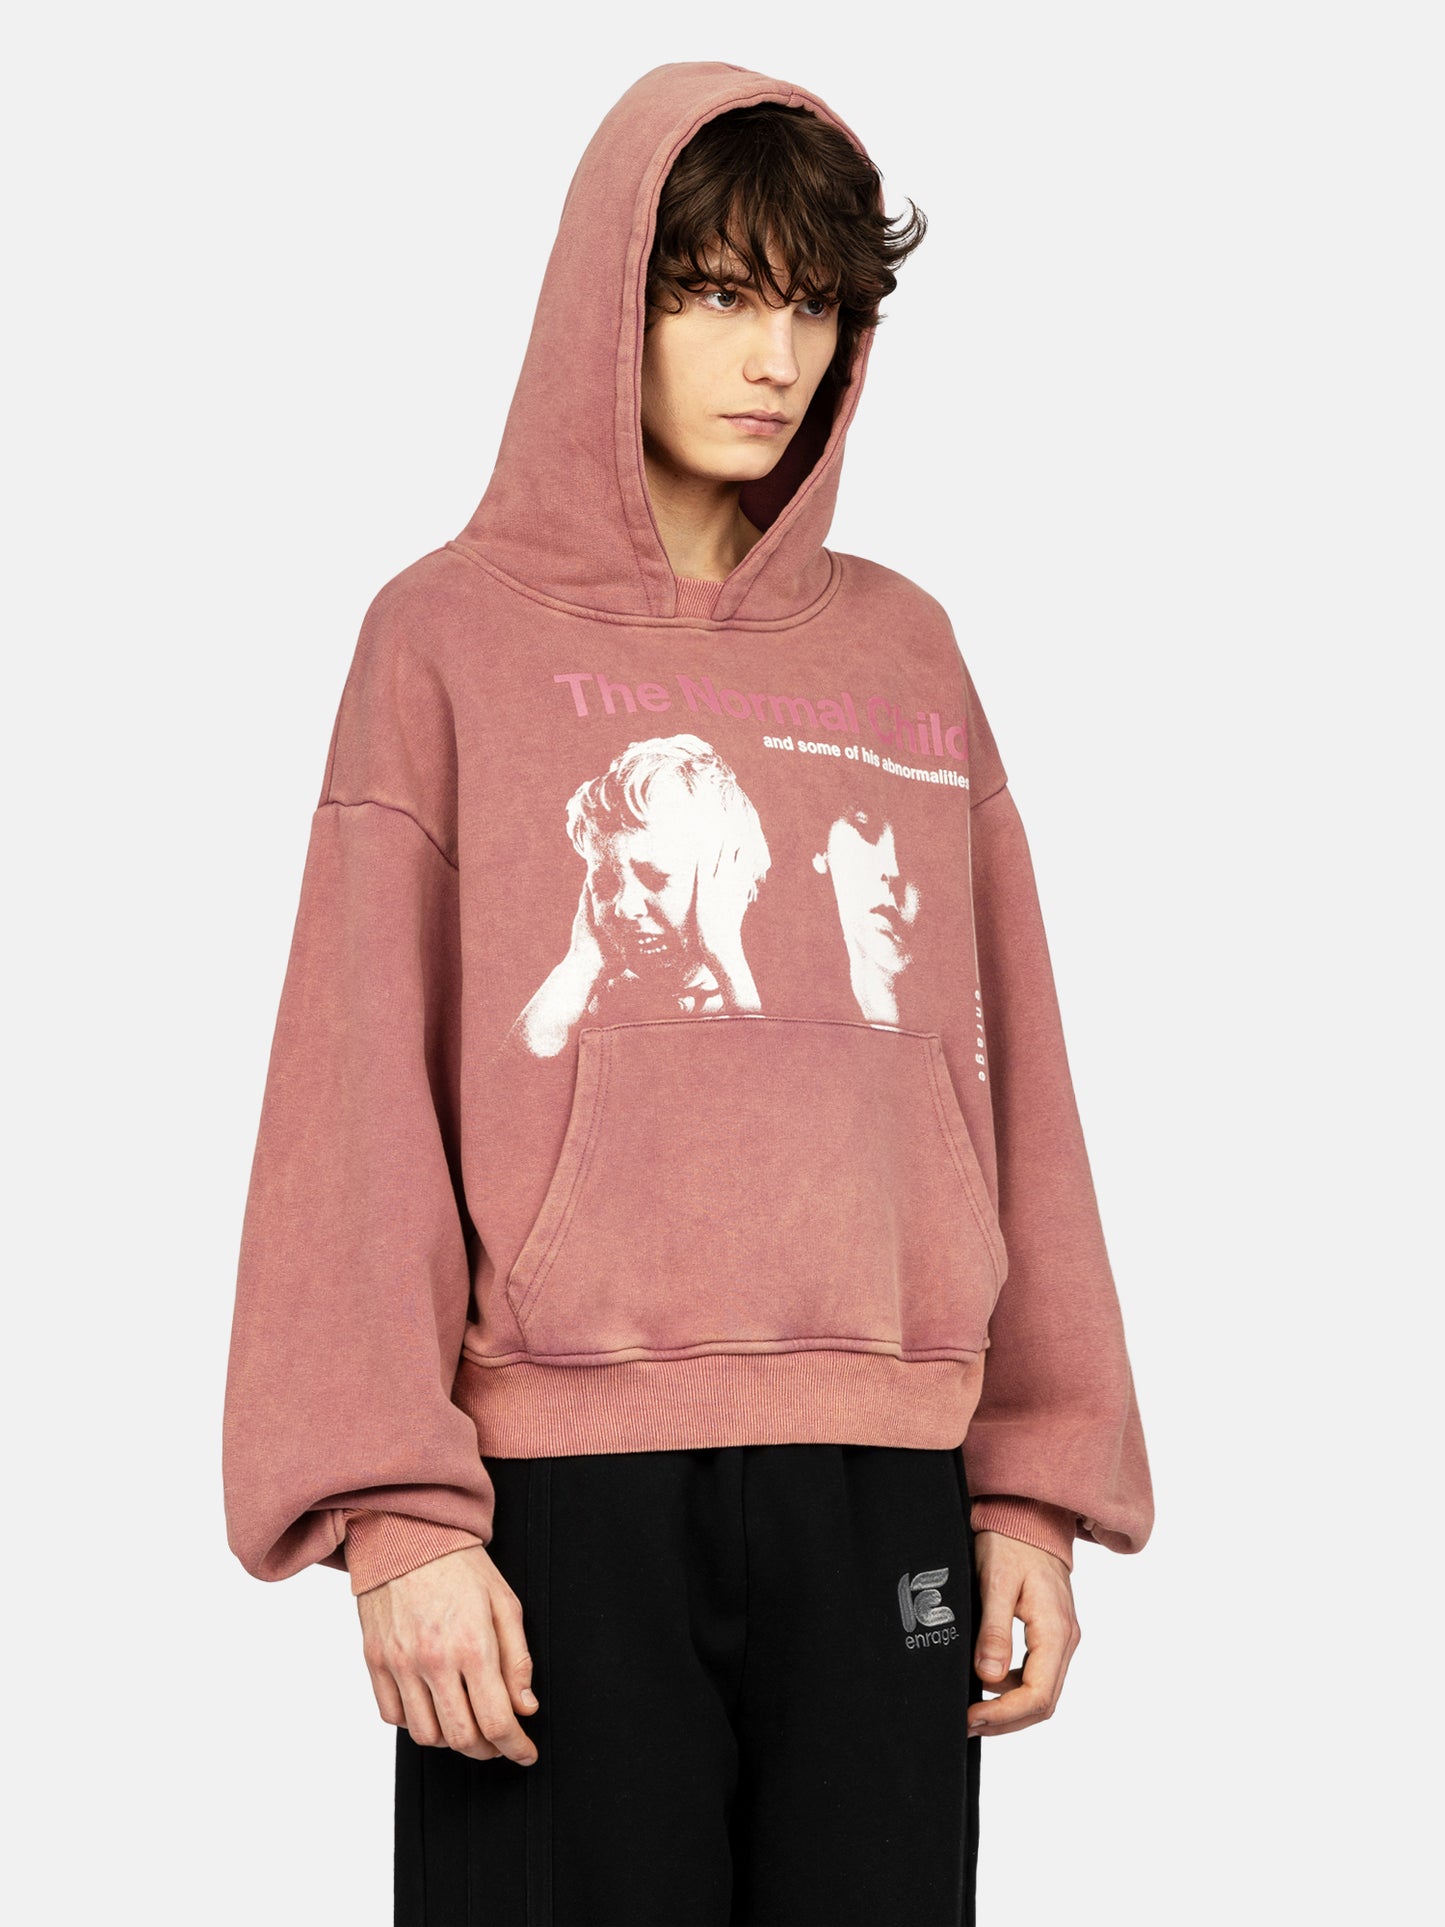 THE NORMAL CHILD EDITOR'S CUT WASHED ROSE HOODIE